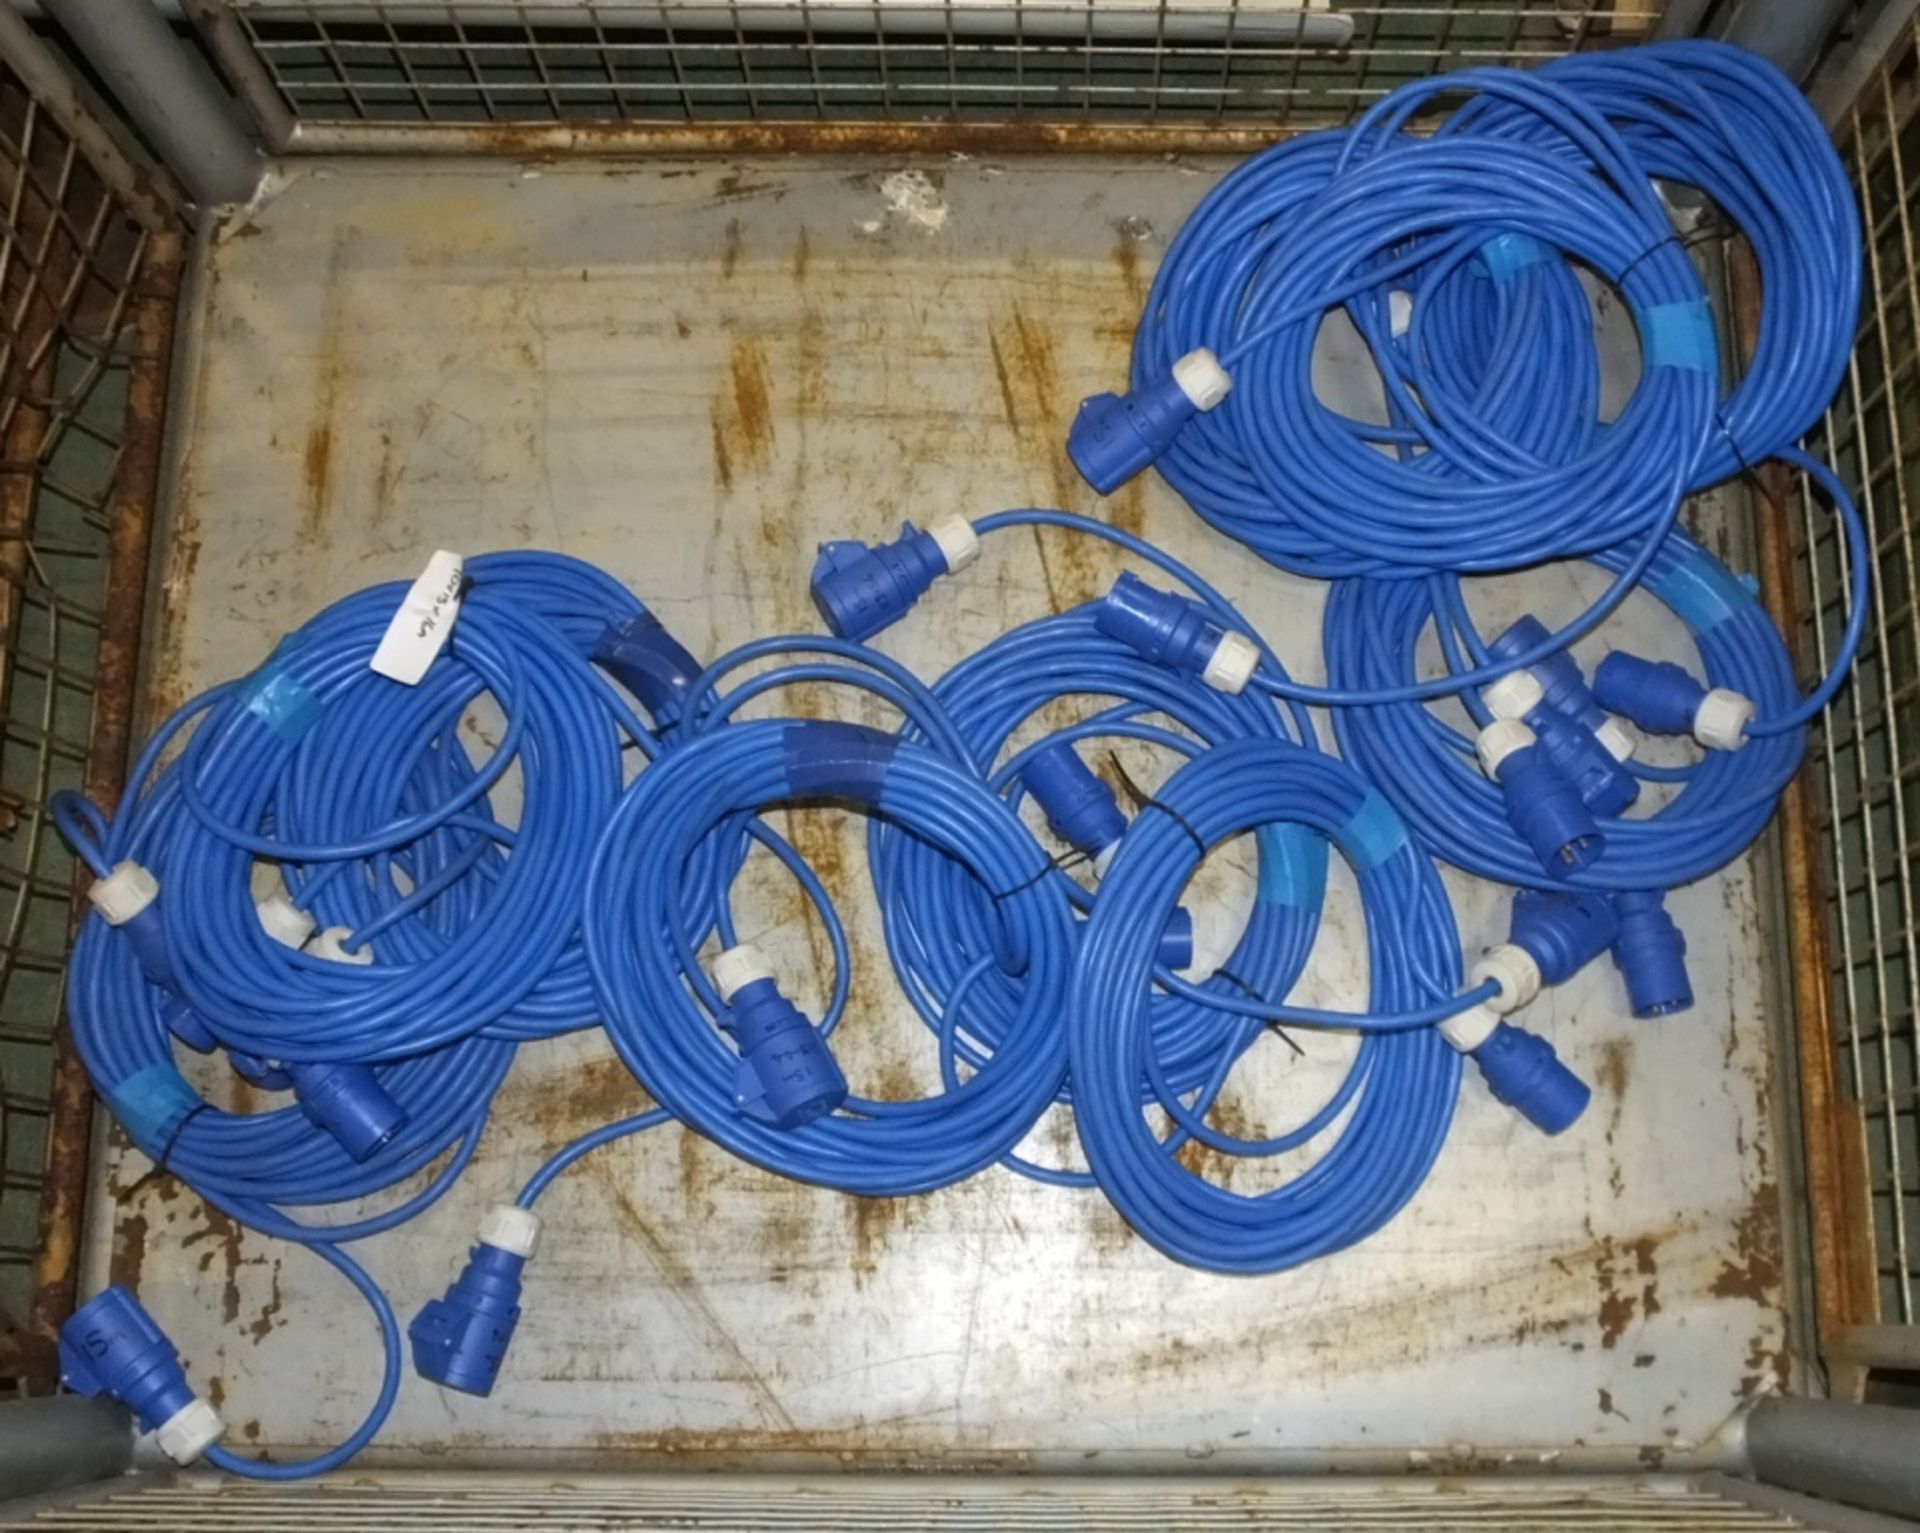 10x 15m x16 A Tent Electrical Cables - Blue